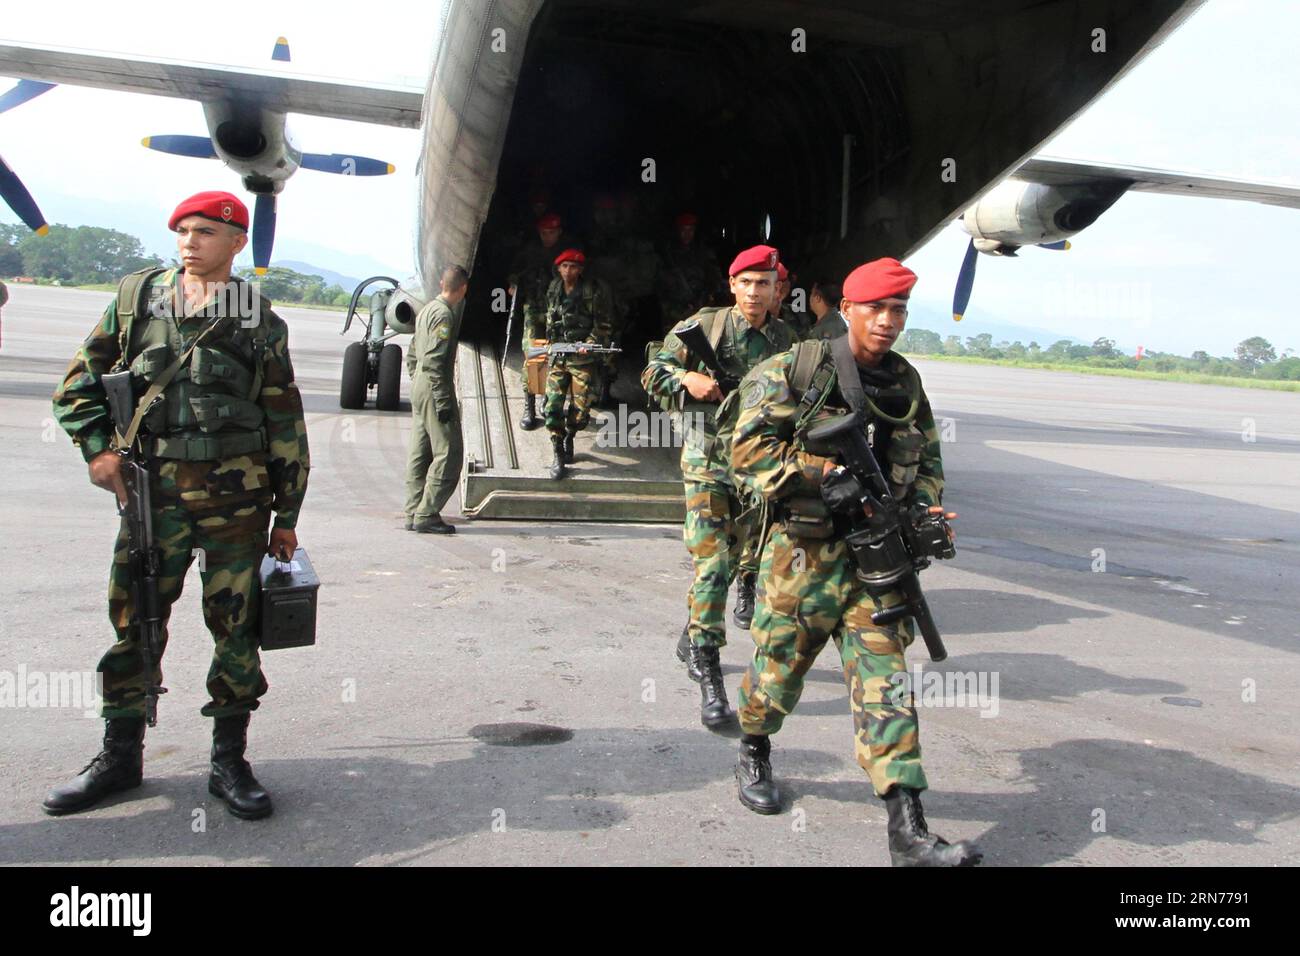 TACHIRA, Aug. 21, 2015 -- Elements of the National Bolivarian Guard (GNB), get down from a carrier plane of the Venezuelan Air Force, near the border between Venezuela and Colombia, in La Fria, Tachira state, Venezuela, on Aug. 21, 2015. Venezuelan President, Nicolas Maduro, announced the extension of the closure of the border with Colombia through San Antonio del Tachira and the locality of Urena, 52km away of San Cristobal, capital of the state, until the two subjects that ambushed members of the Armed Force are captured. ) (da) VENEZUELA-TACHIRA-COLOMBIA-MILITARY-BORDER STR PUBLICATIONxNOTx Stock Photo